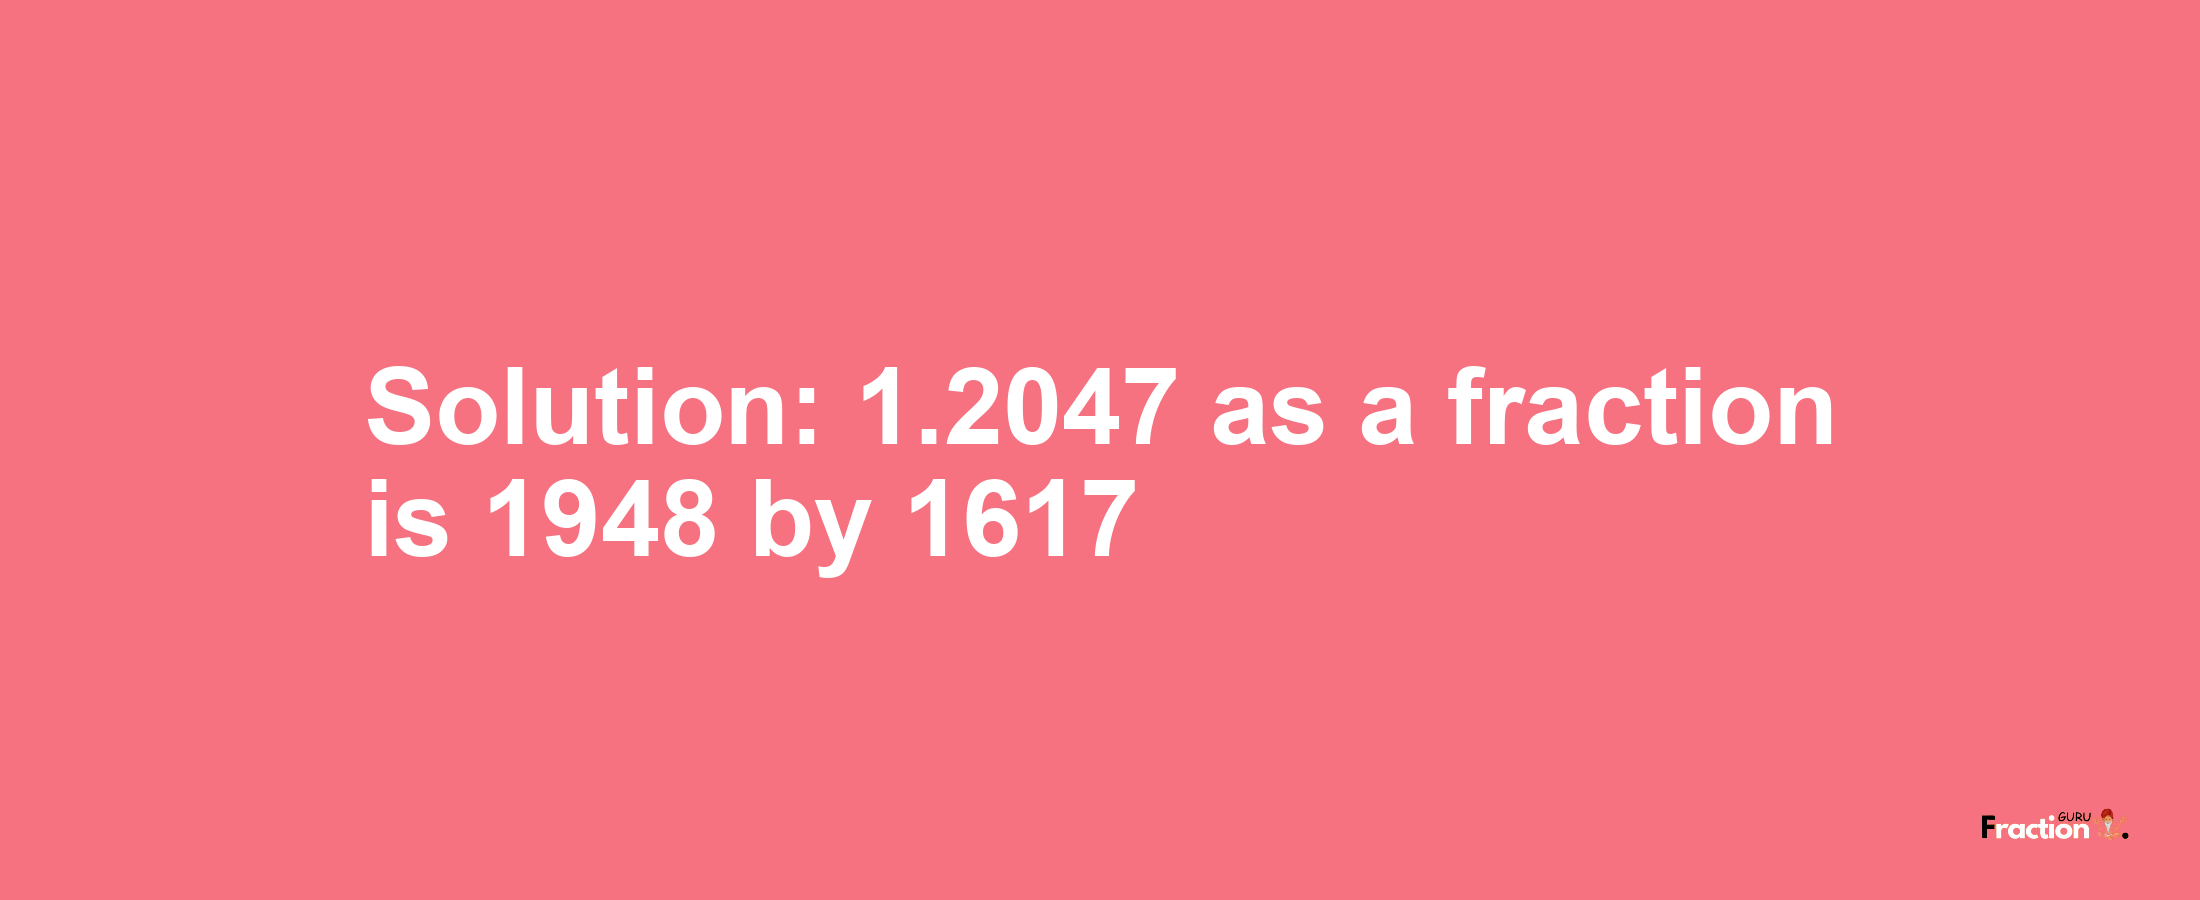 Solution:1.2047 as a fraction is 1948/1617